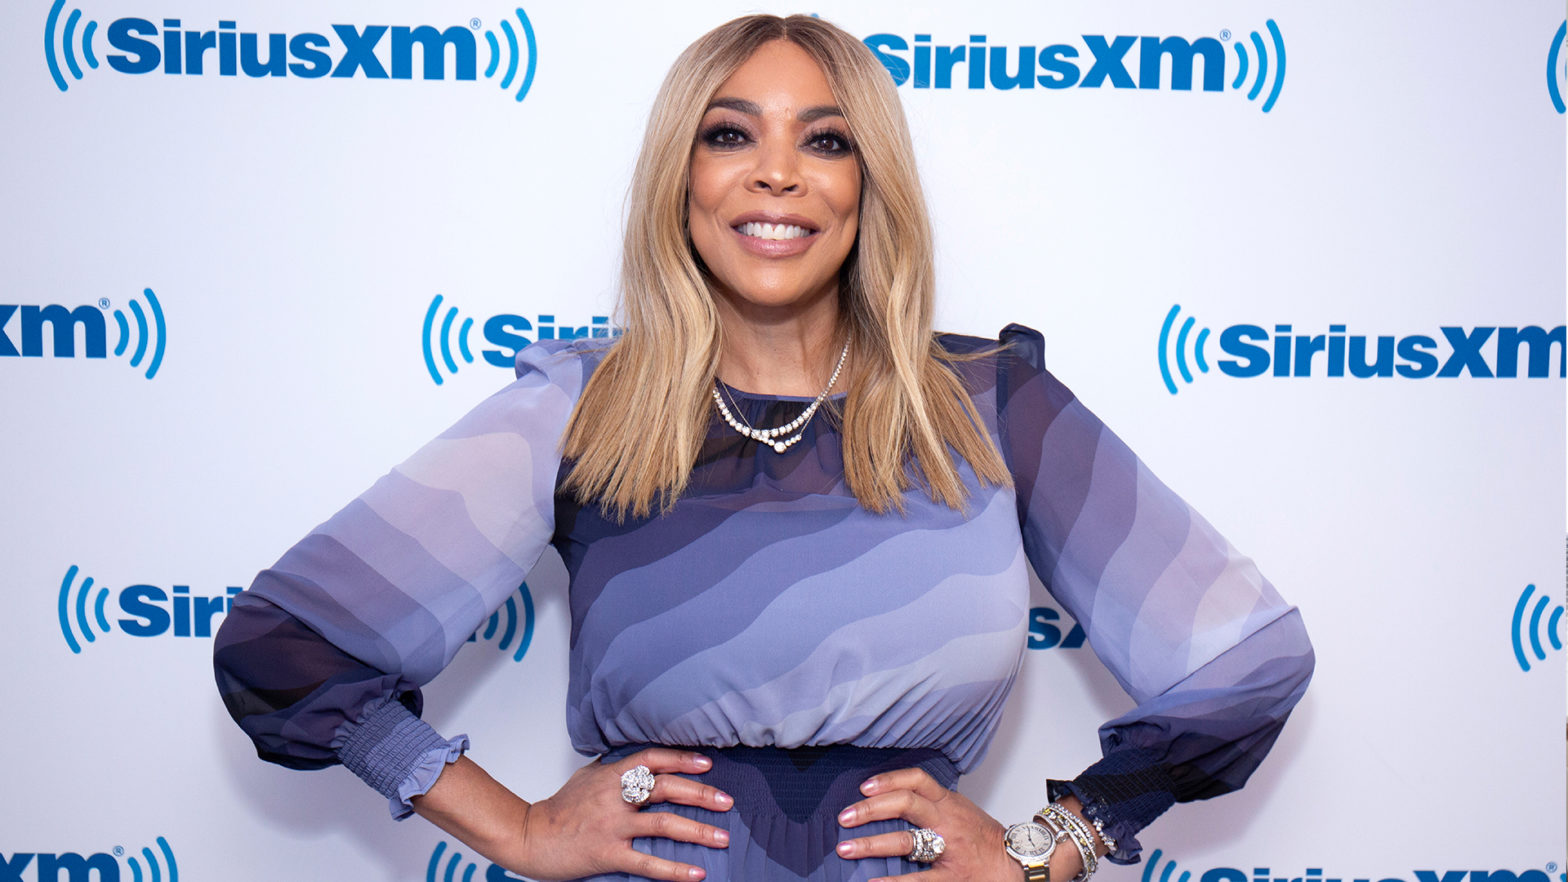 How Wendy Williams Went From Her First Radio Gig Of Making Under $4 An Hour To A $40M Fortune